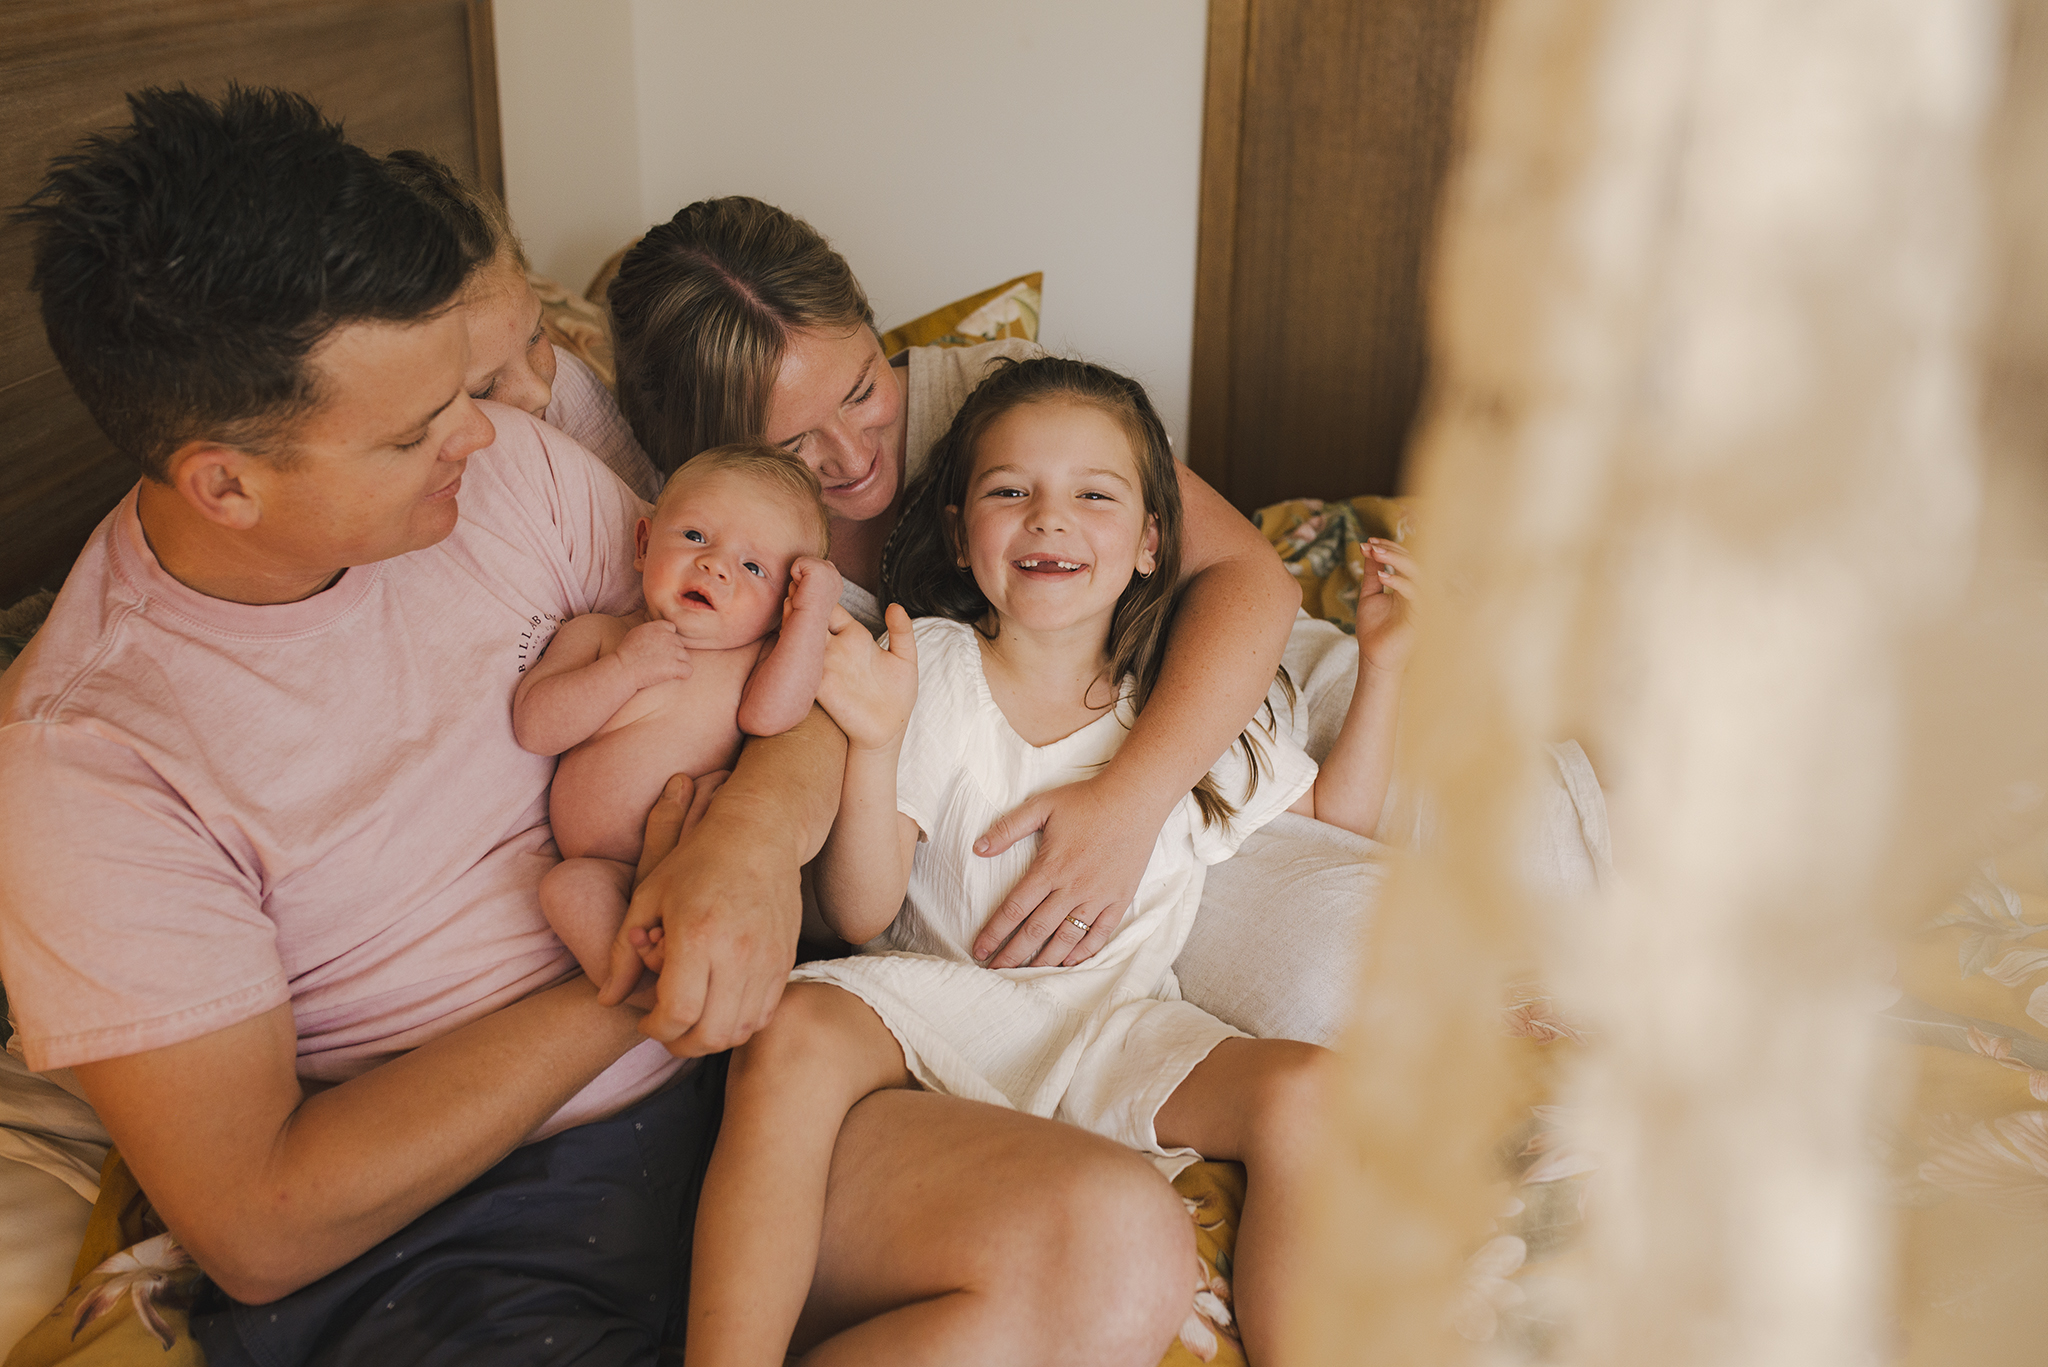 A newborn family photo. The family are snuggled up together on a large oak bed to the left of the frame with the newborn in dads arms. Everyone is smiling and interacting with each other. To the right of the frame a panel of lace curtain billows across the image giving the impression the photographer is looking into the room from outside.